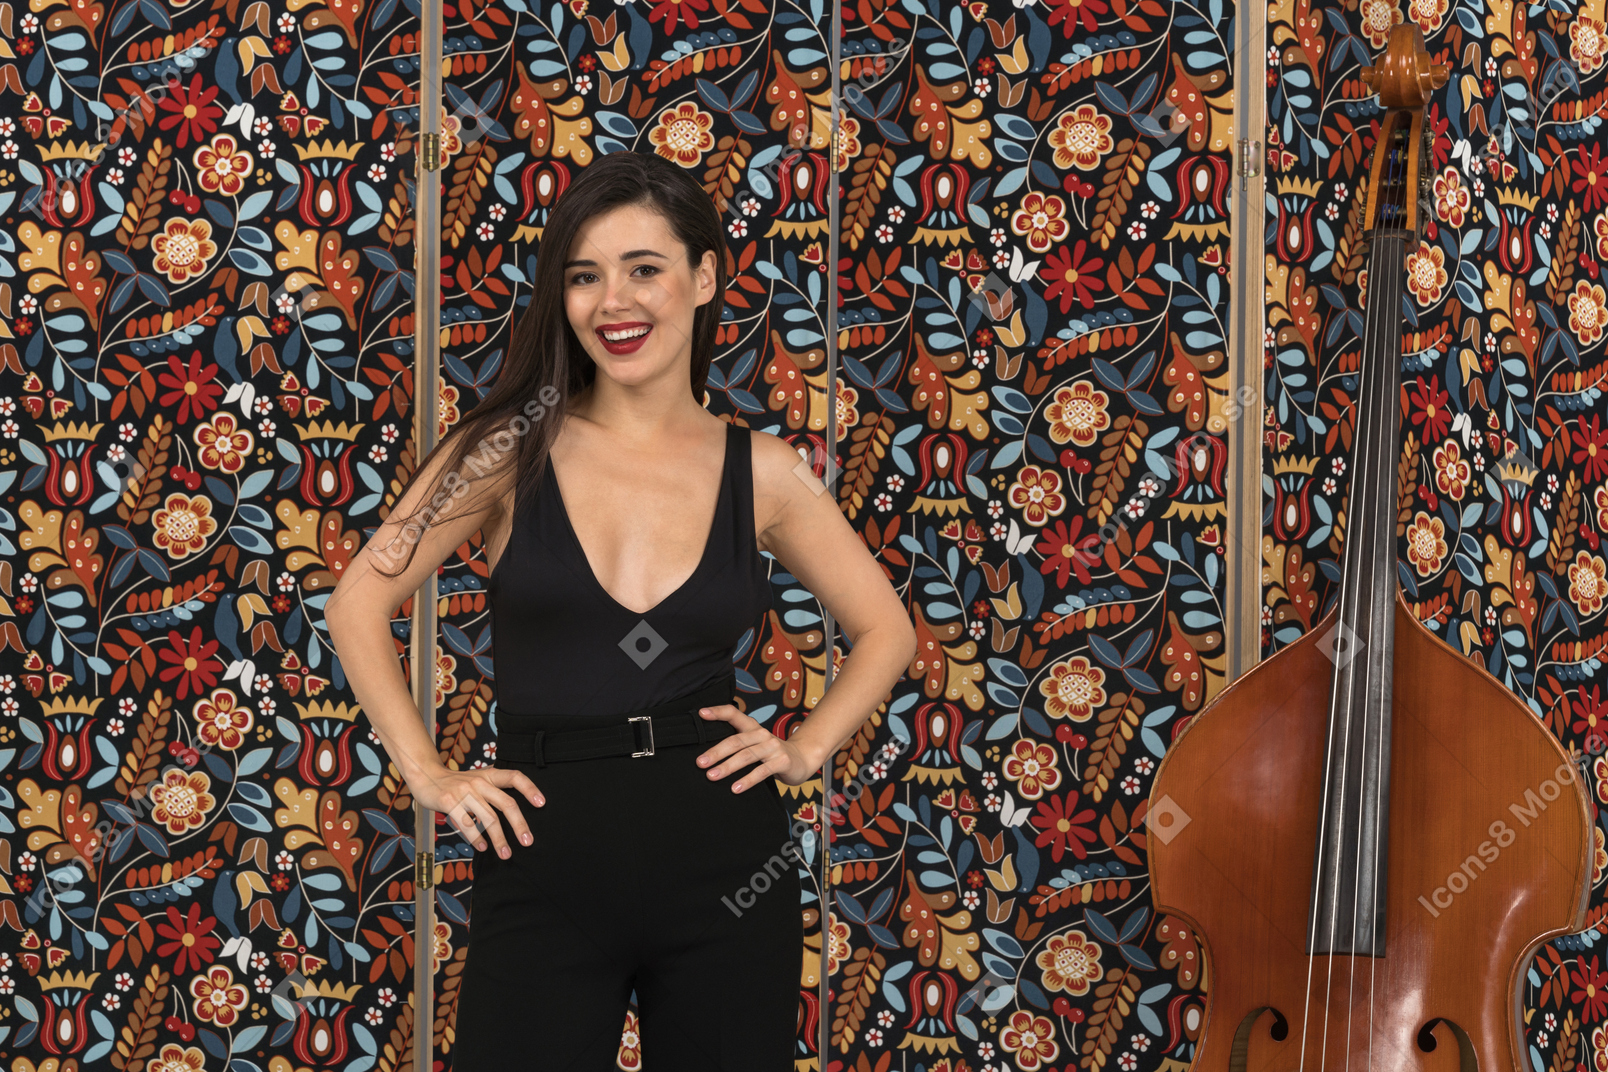 Smiling young woman standing with her arms akimbo next to a double-bass